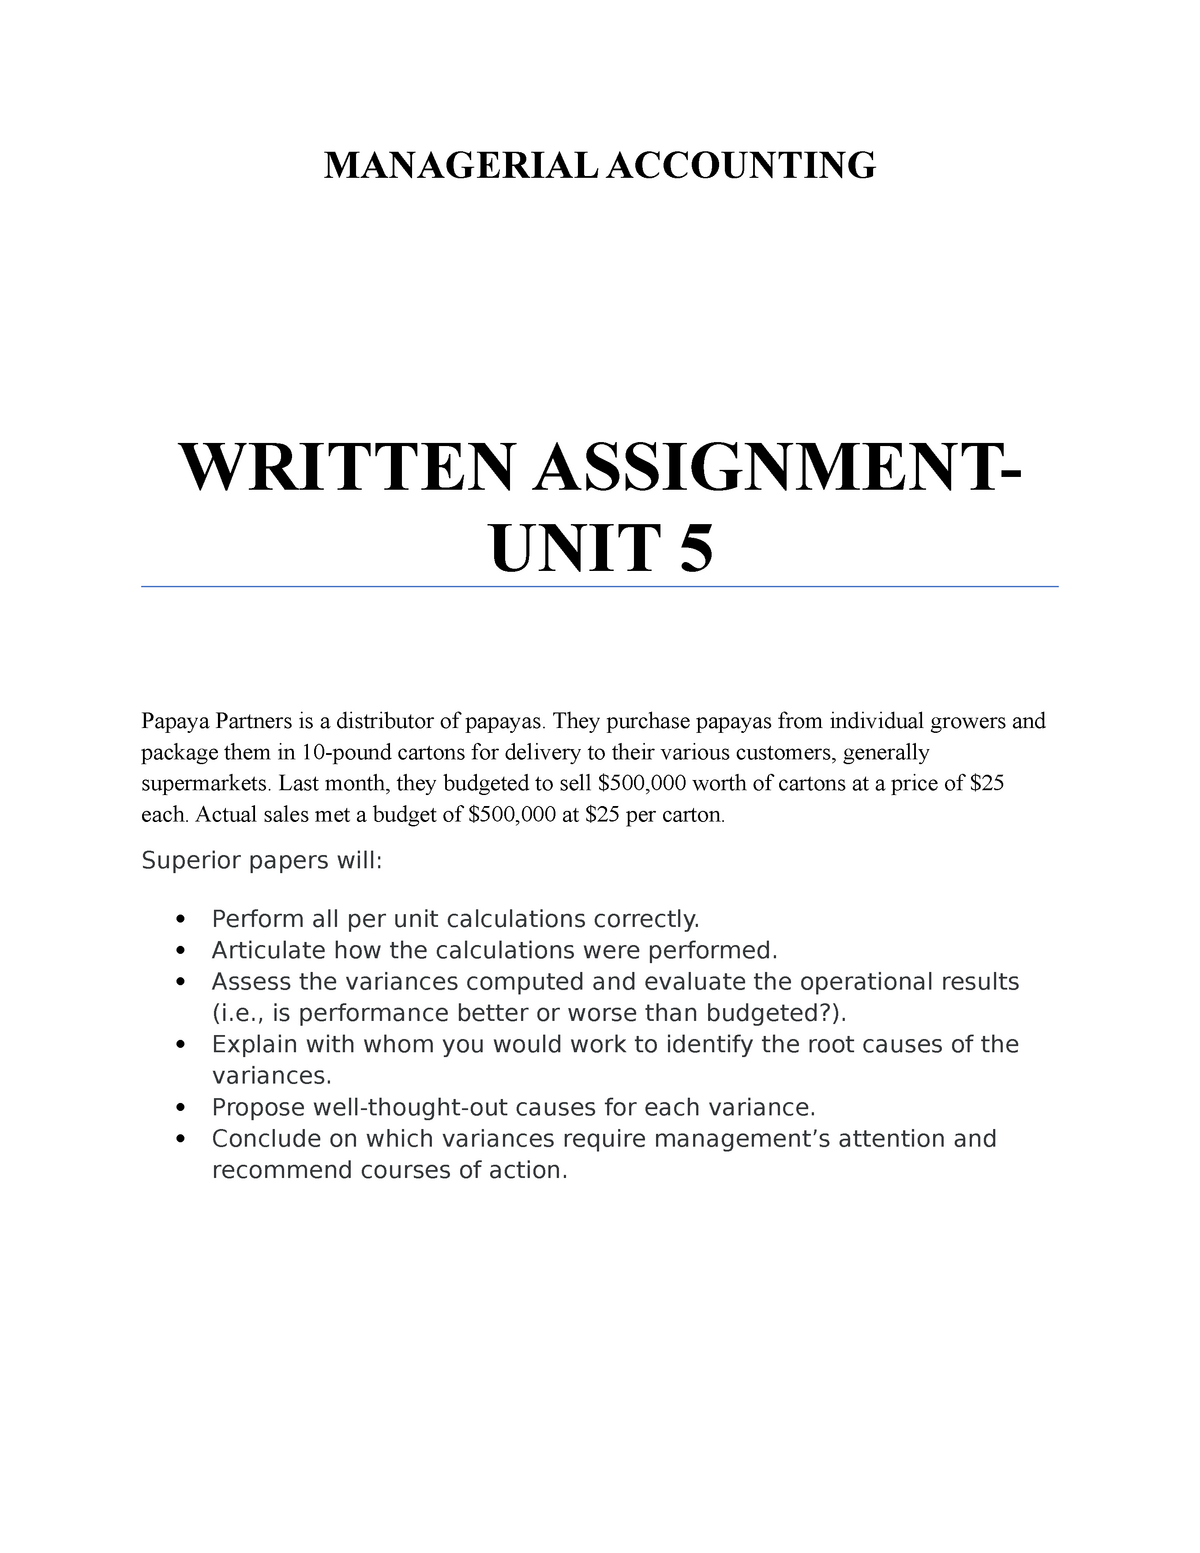 unit 5 accounting principles assignment